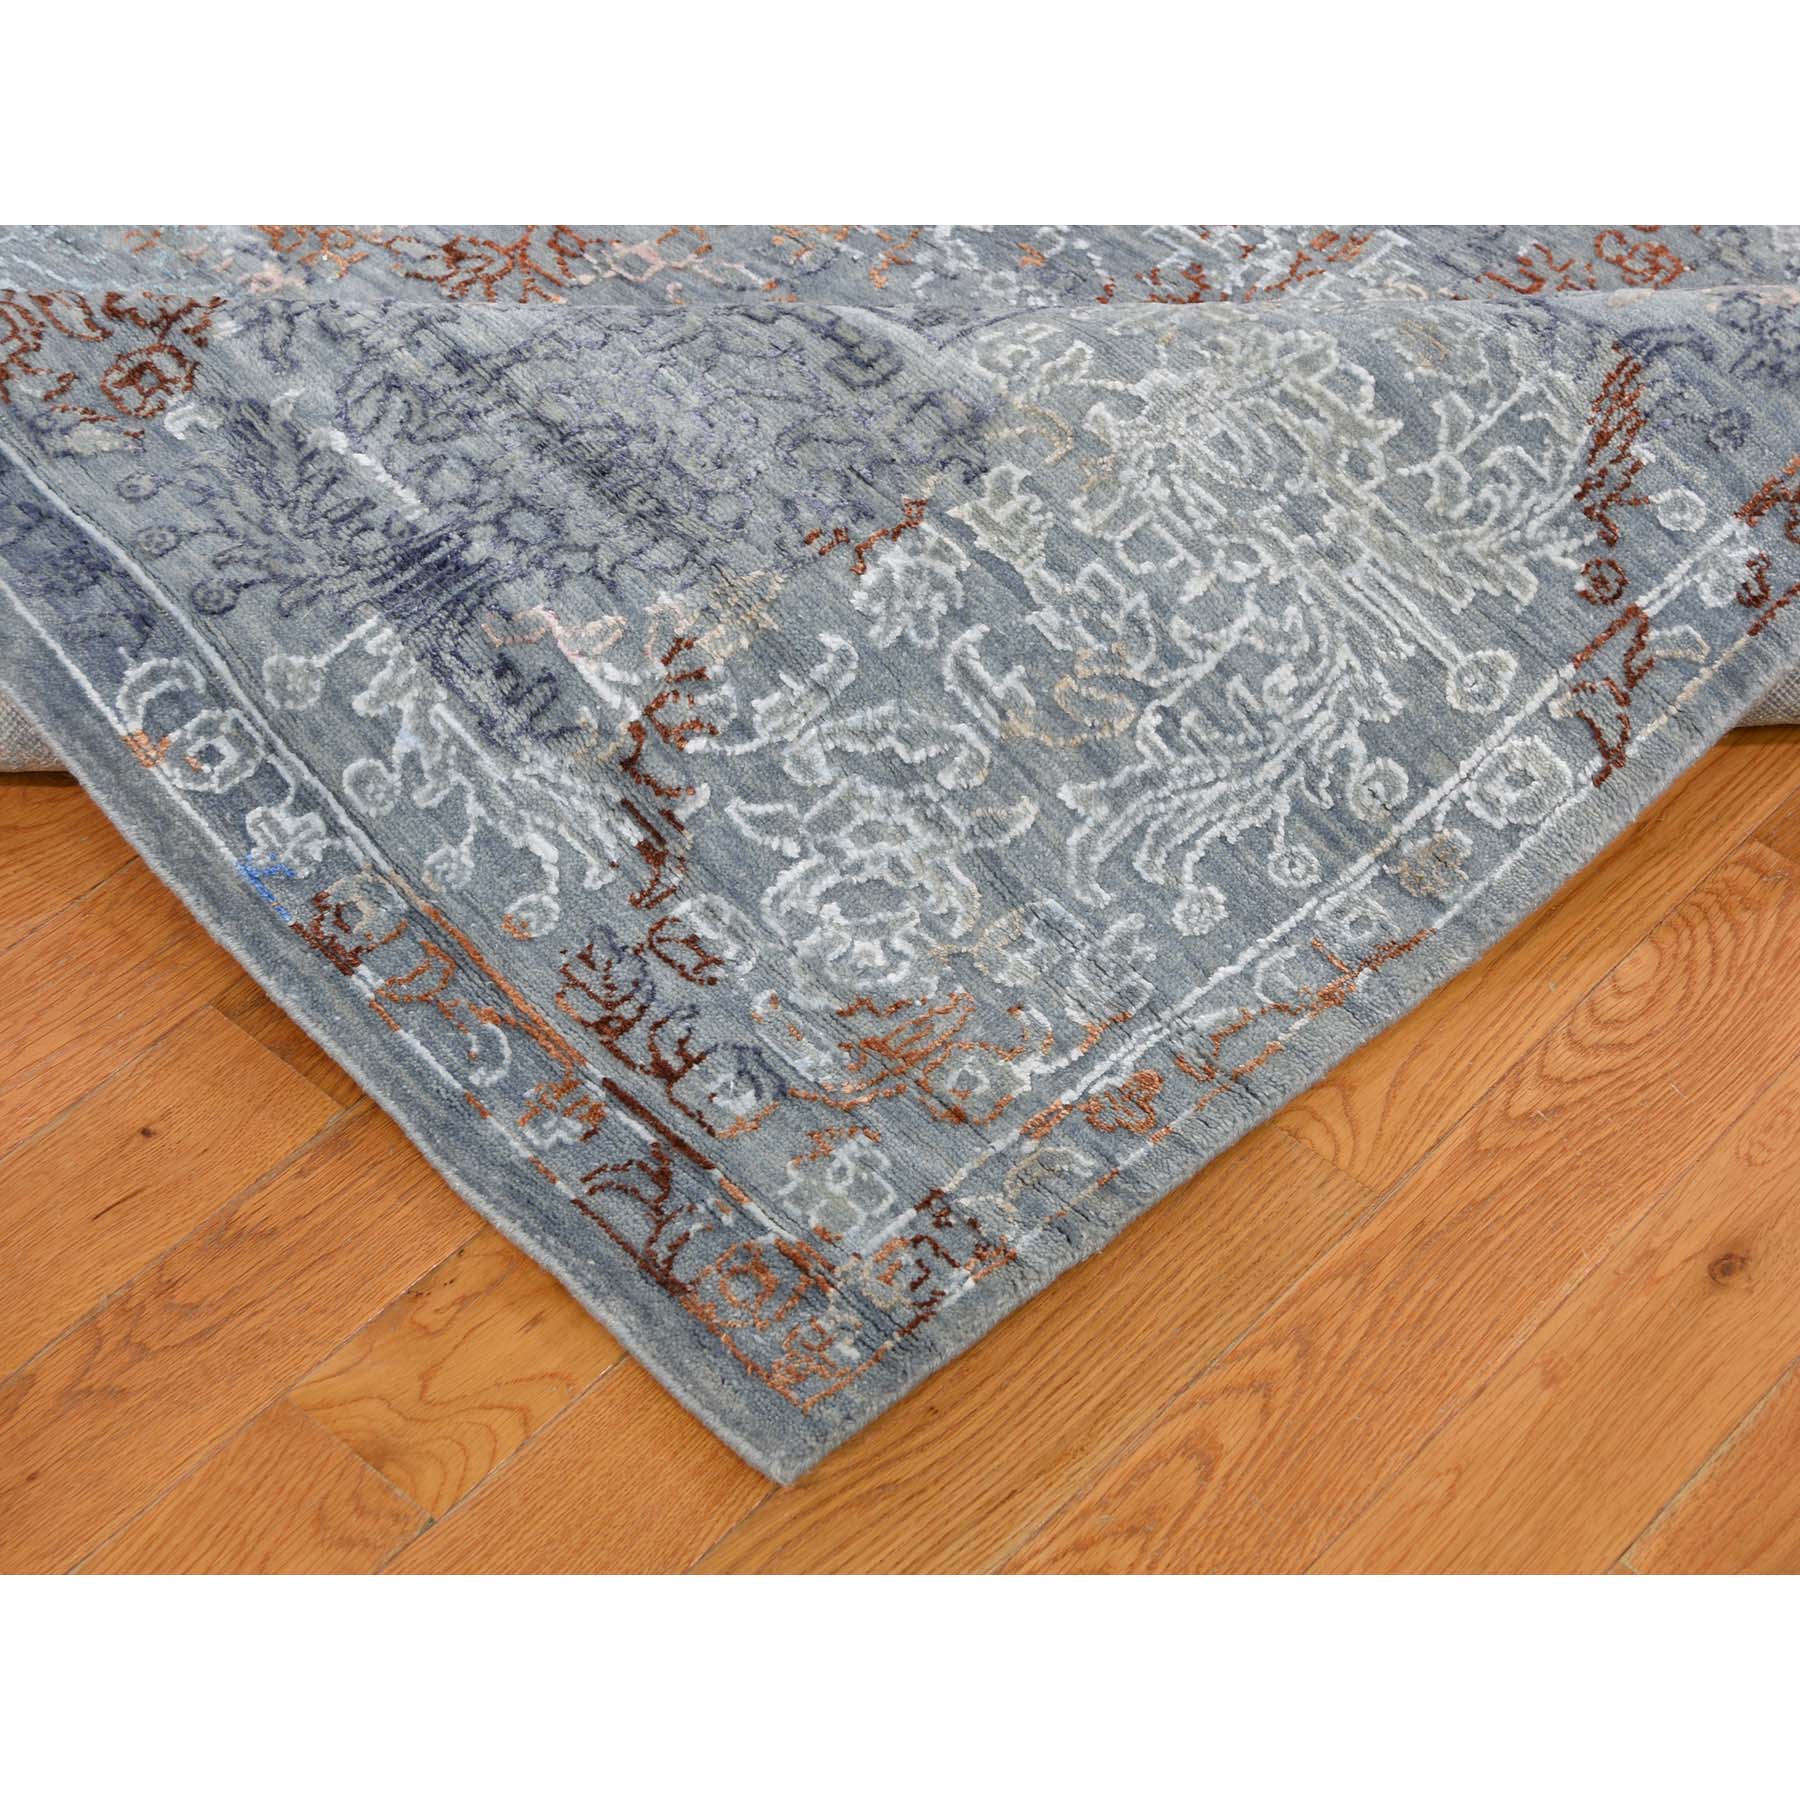 9-x12- Blue Flower Design Wool And Silk Hand-Knotted Oriental Rug 